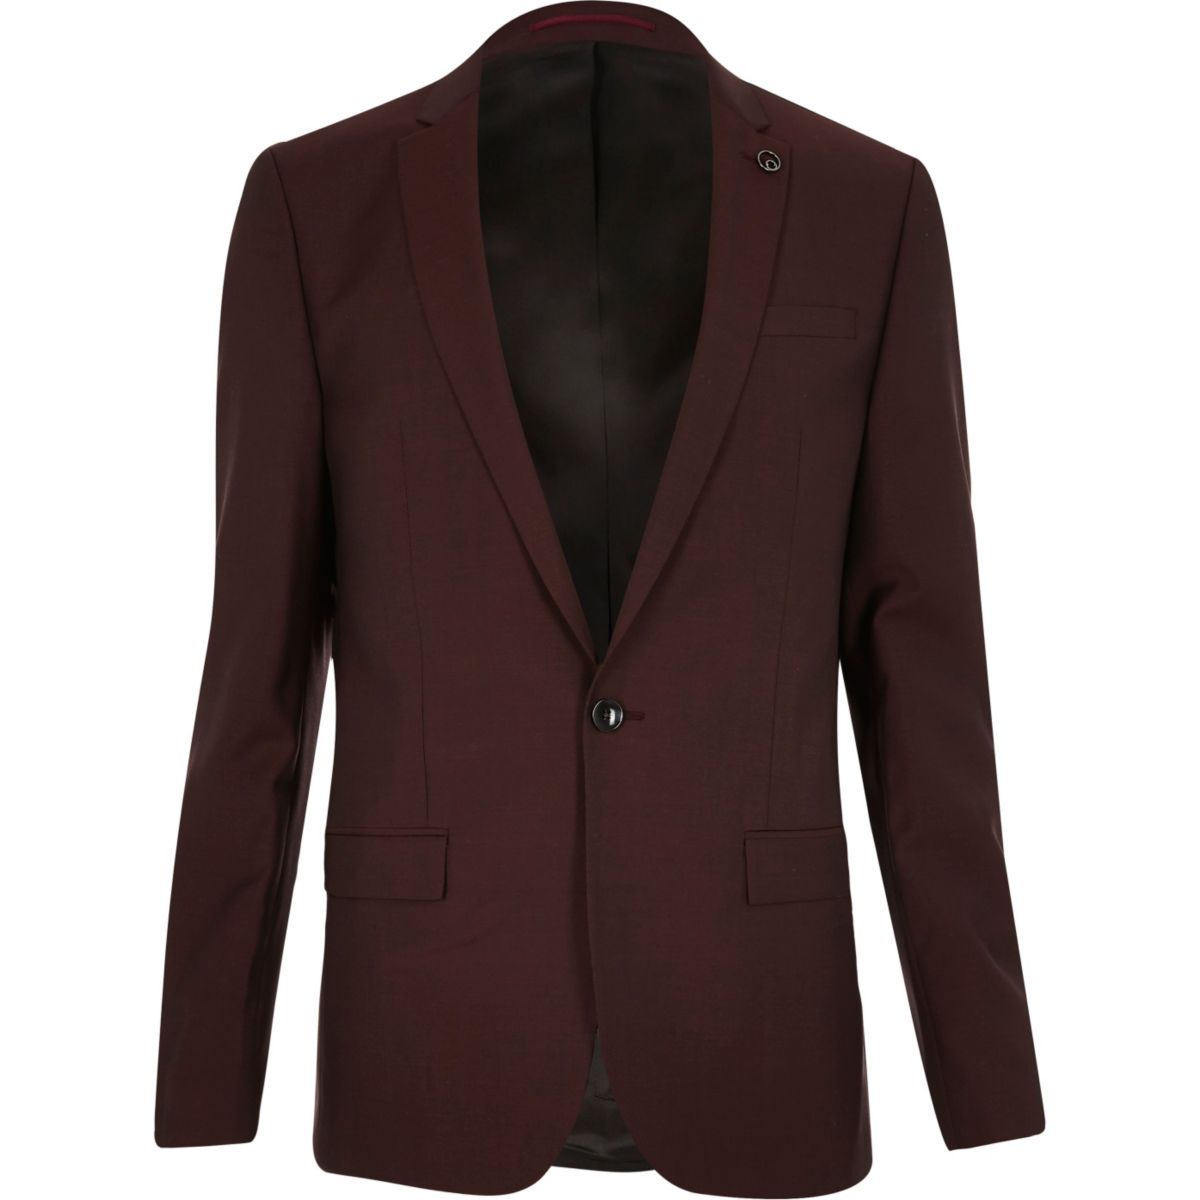 river island size guide mens jacket